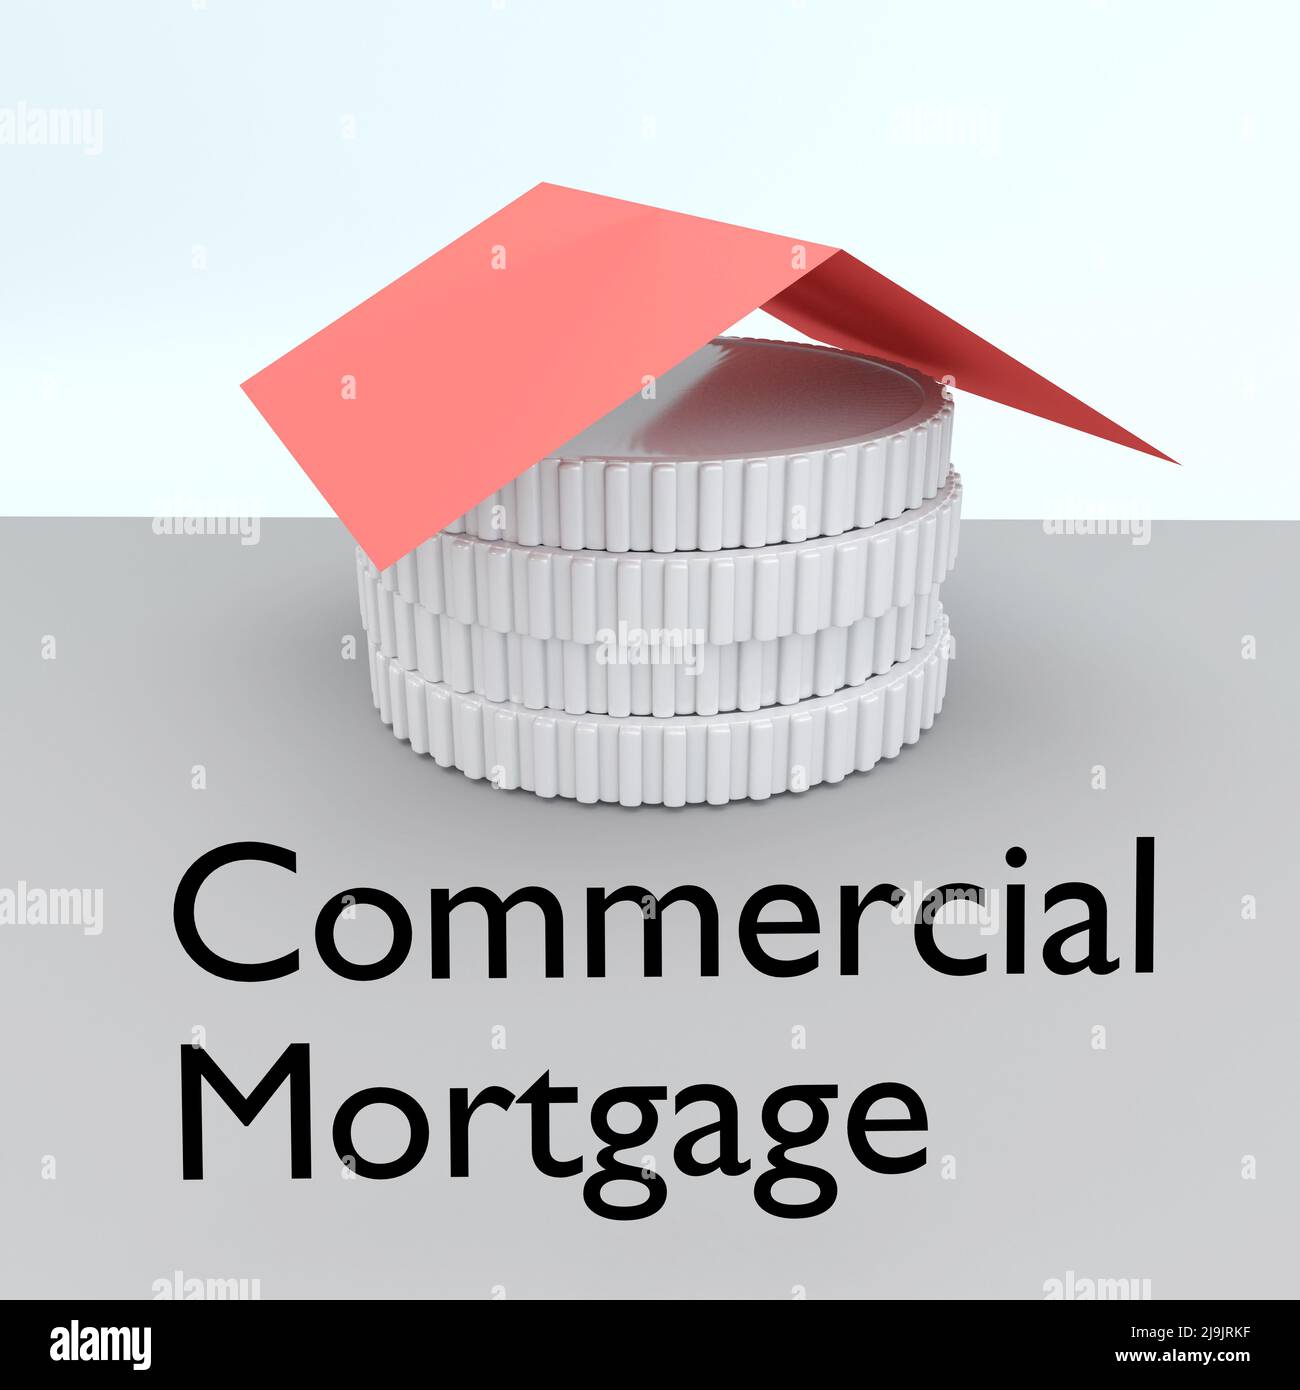 3D illustration of four coins under a symbolic red roof, along with the script Commercial Mortgage. Stock Photo